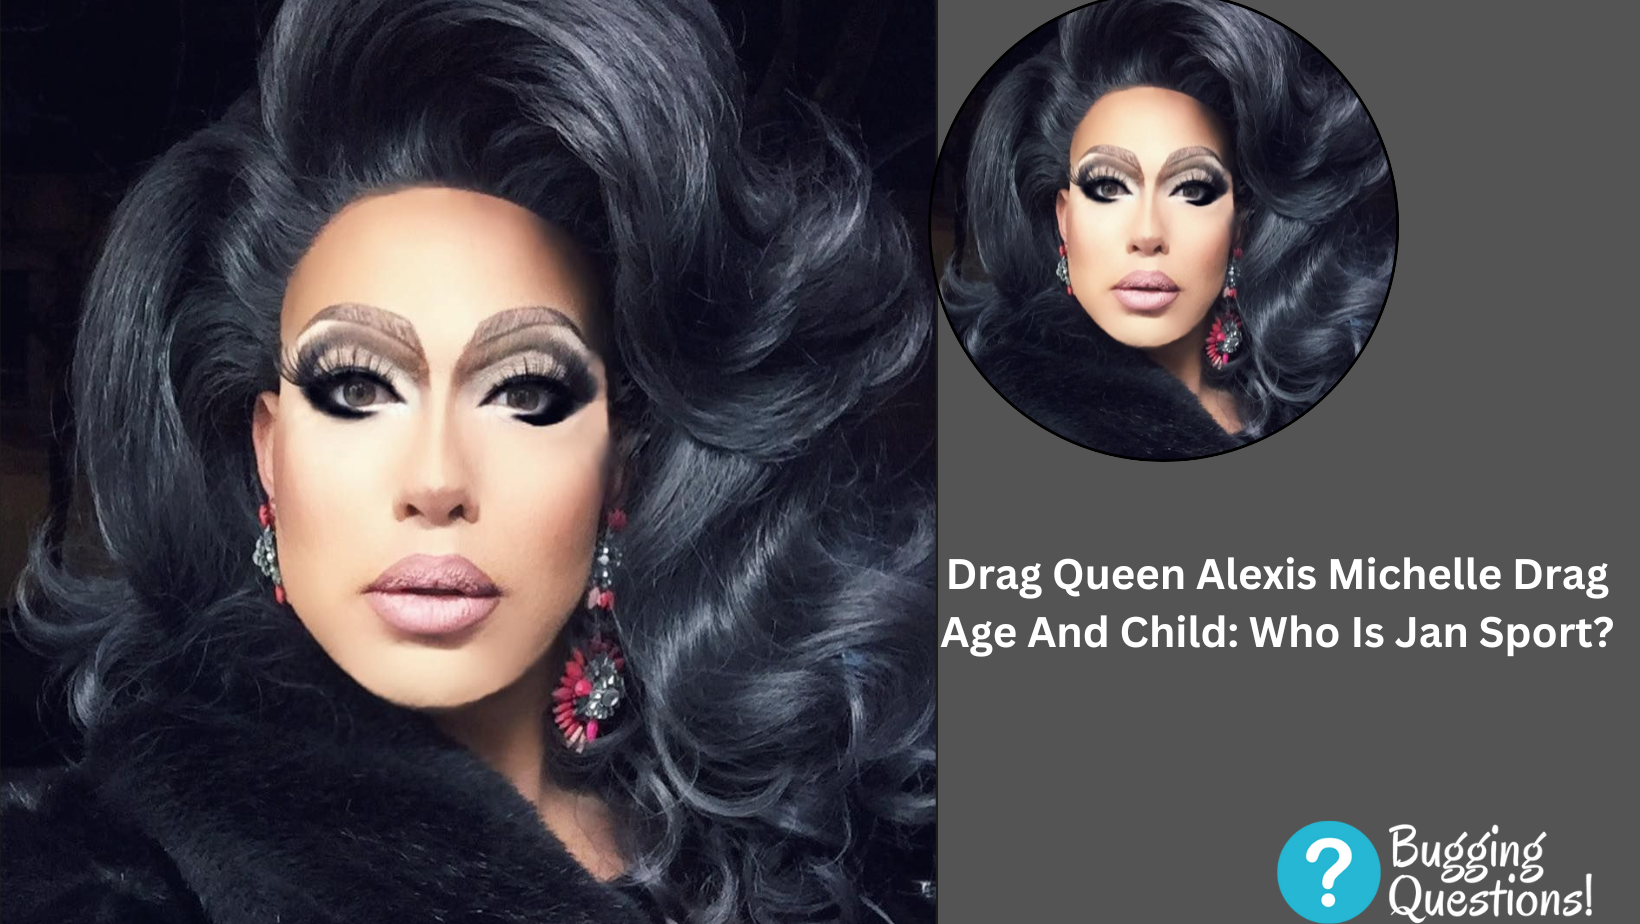 Drag Queen Alexis Michelle Drag Age And Child